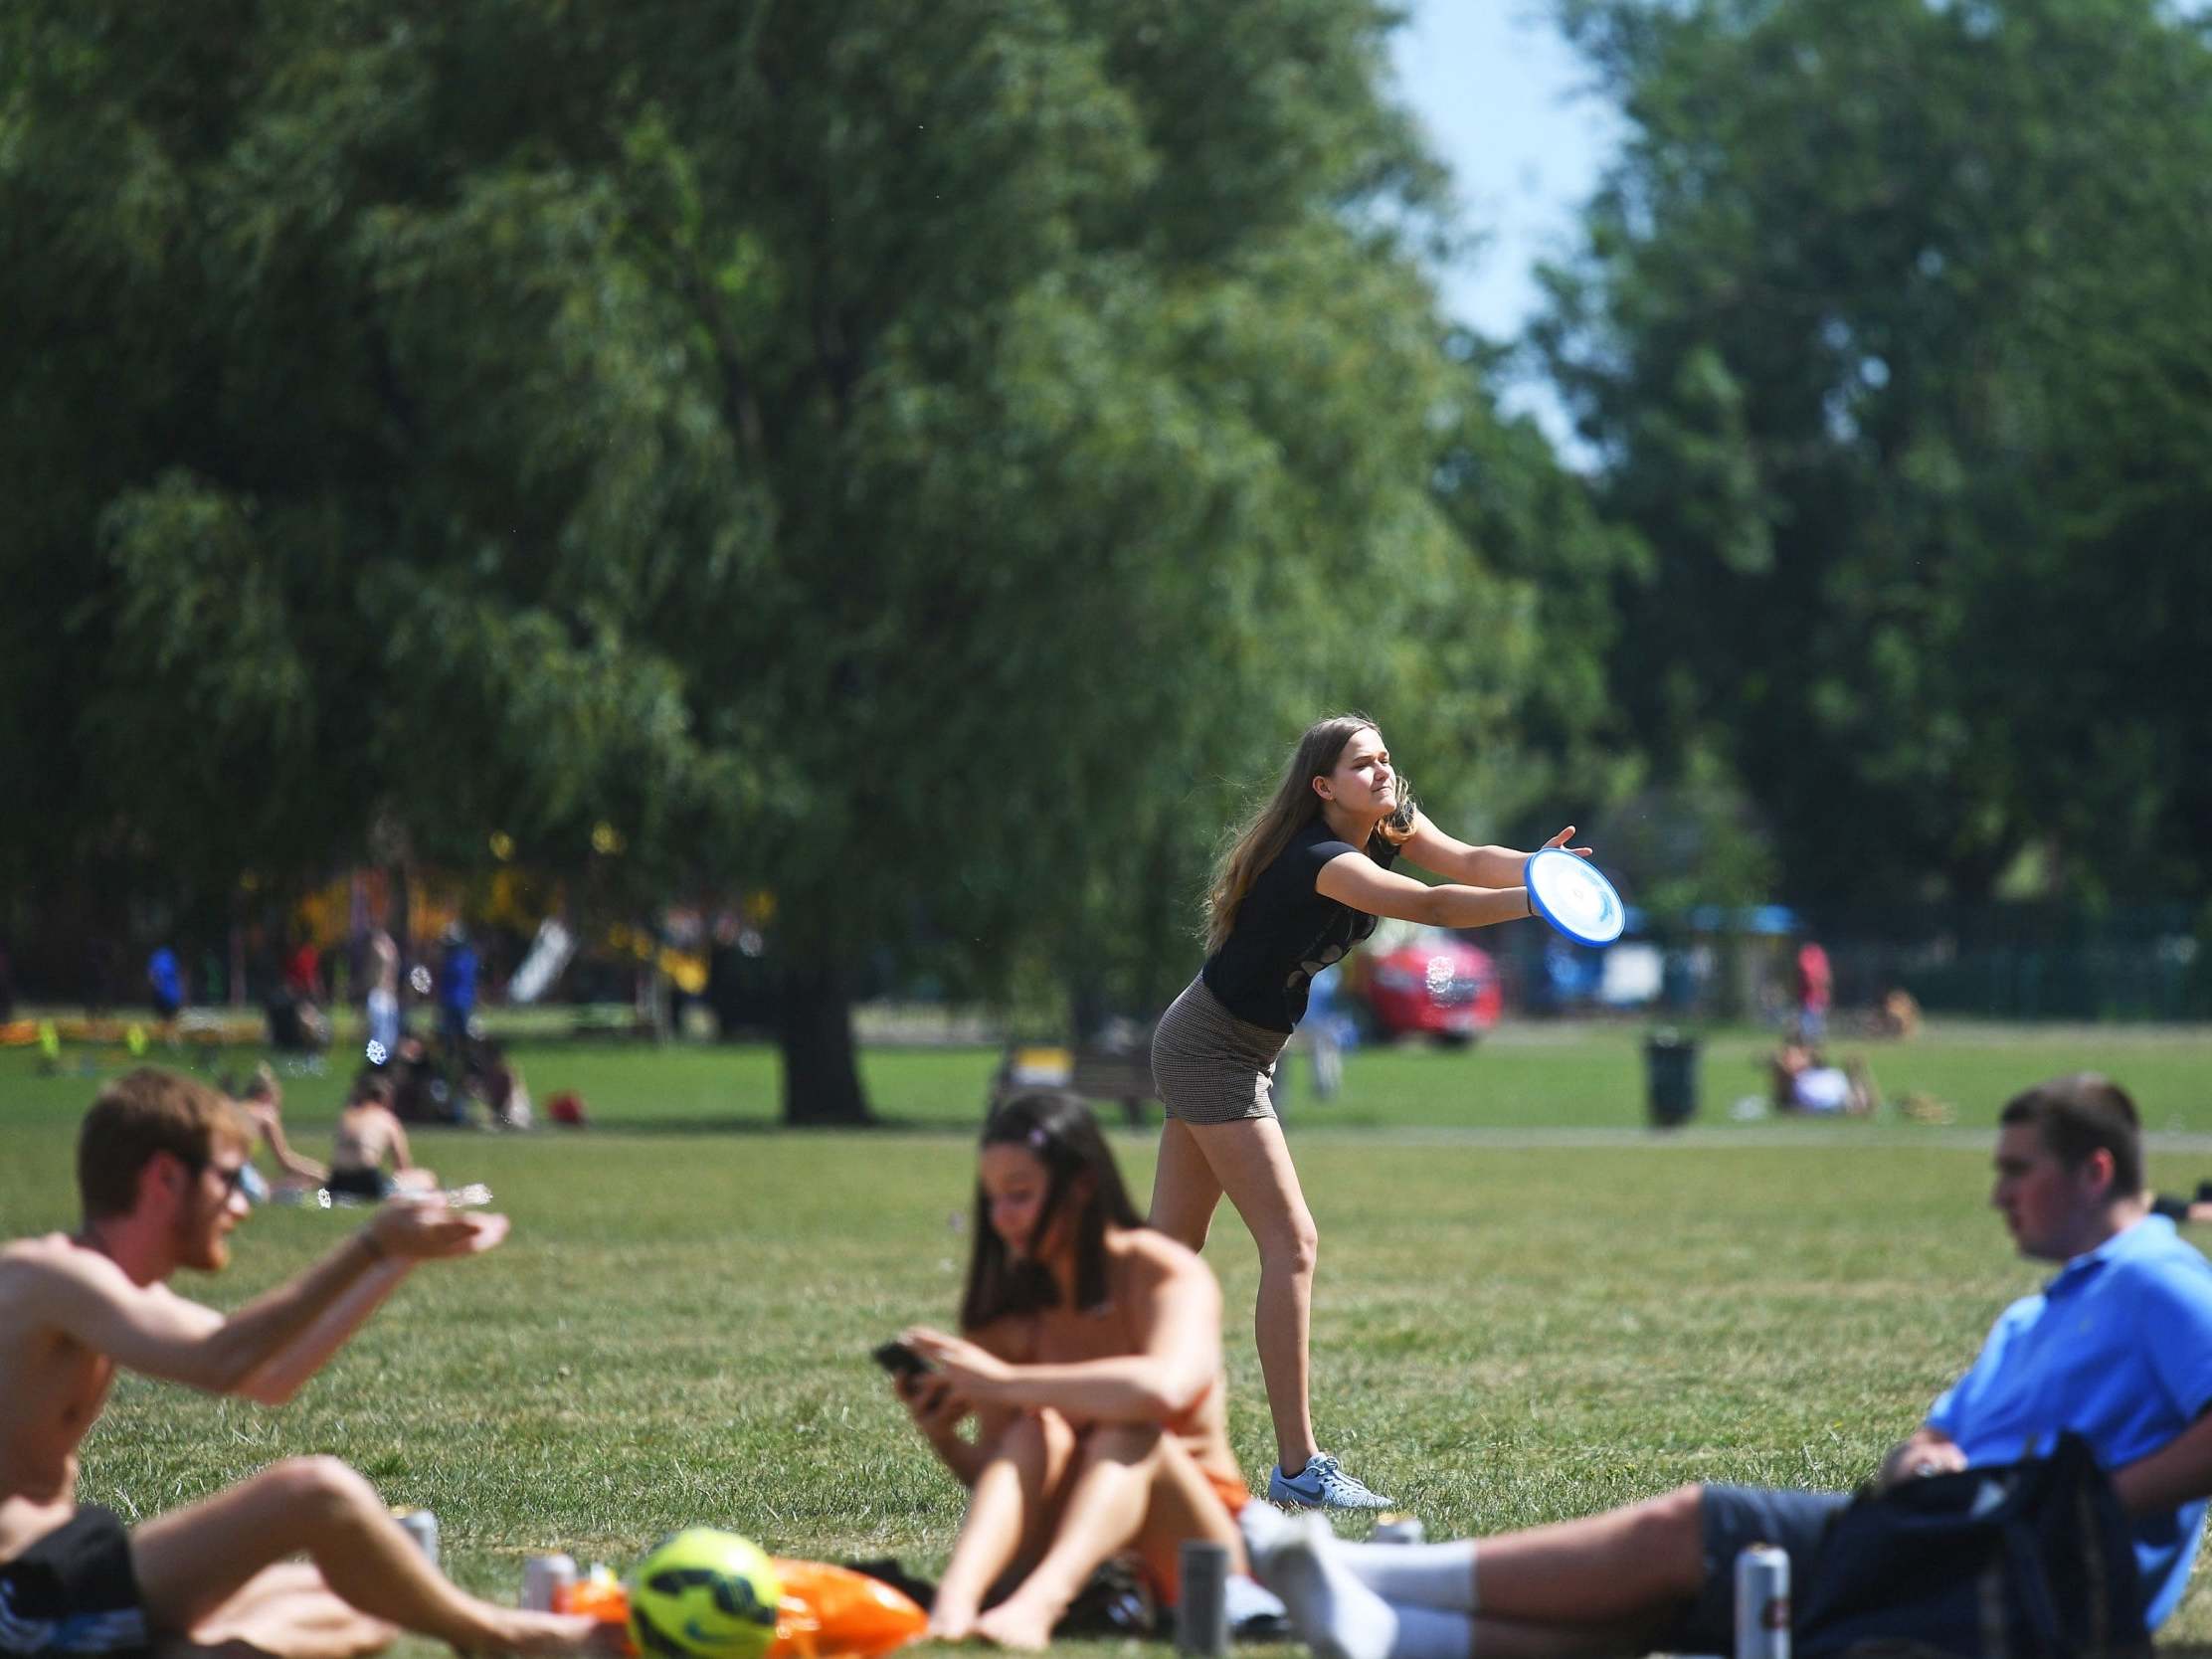 UK weather: May was sunniest month since records began, Met Office says